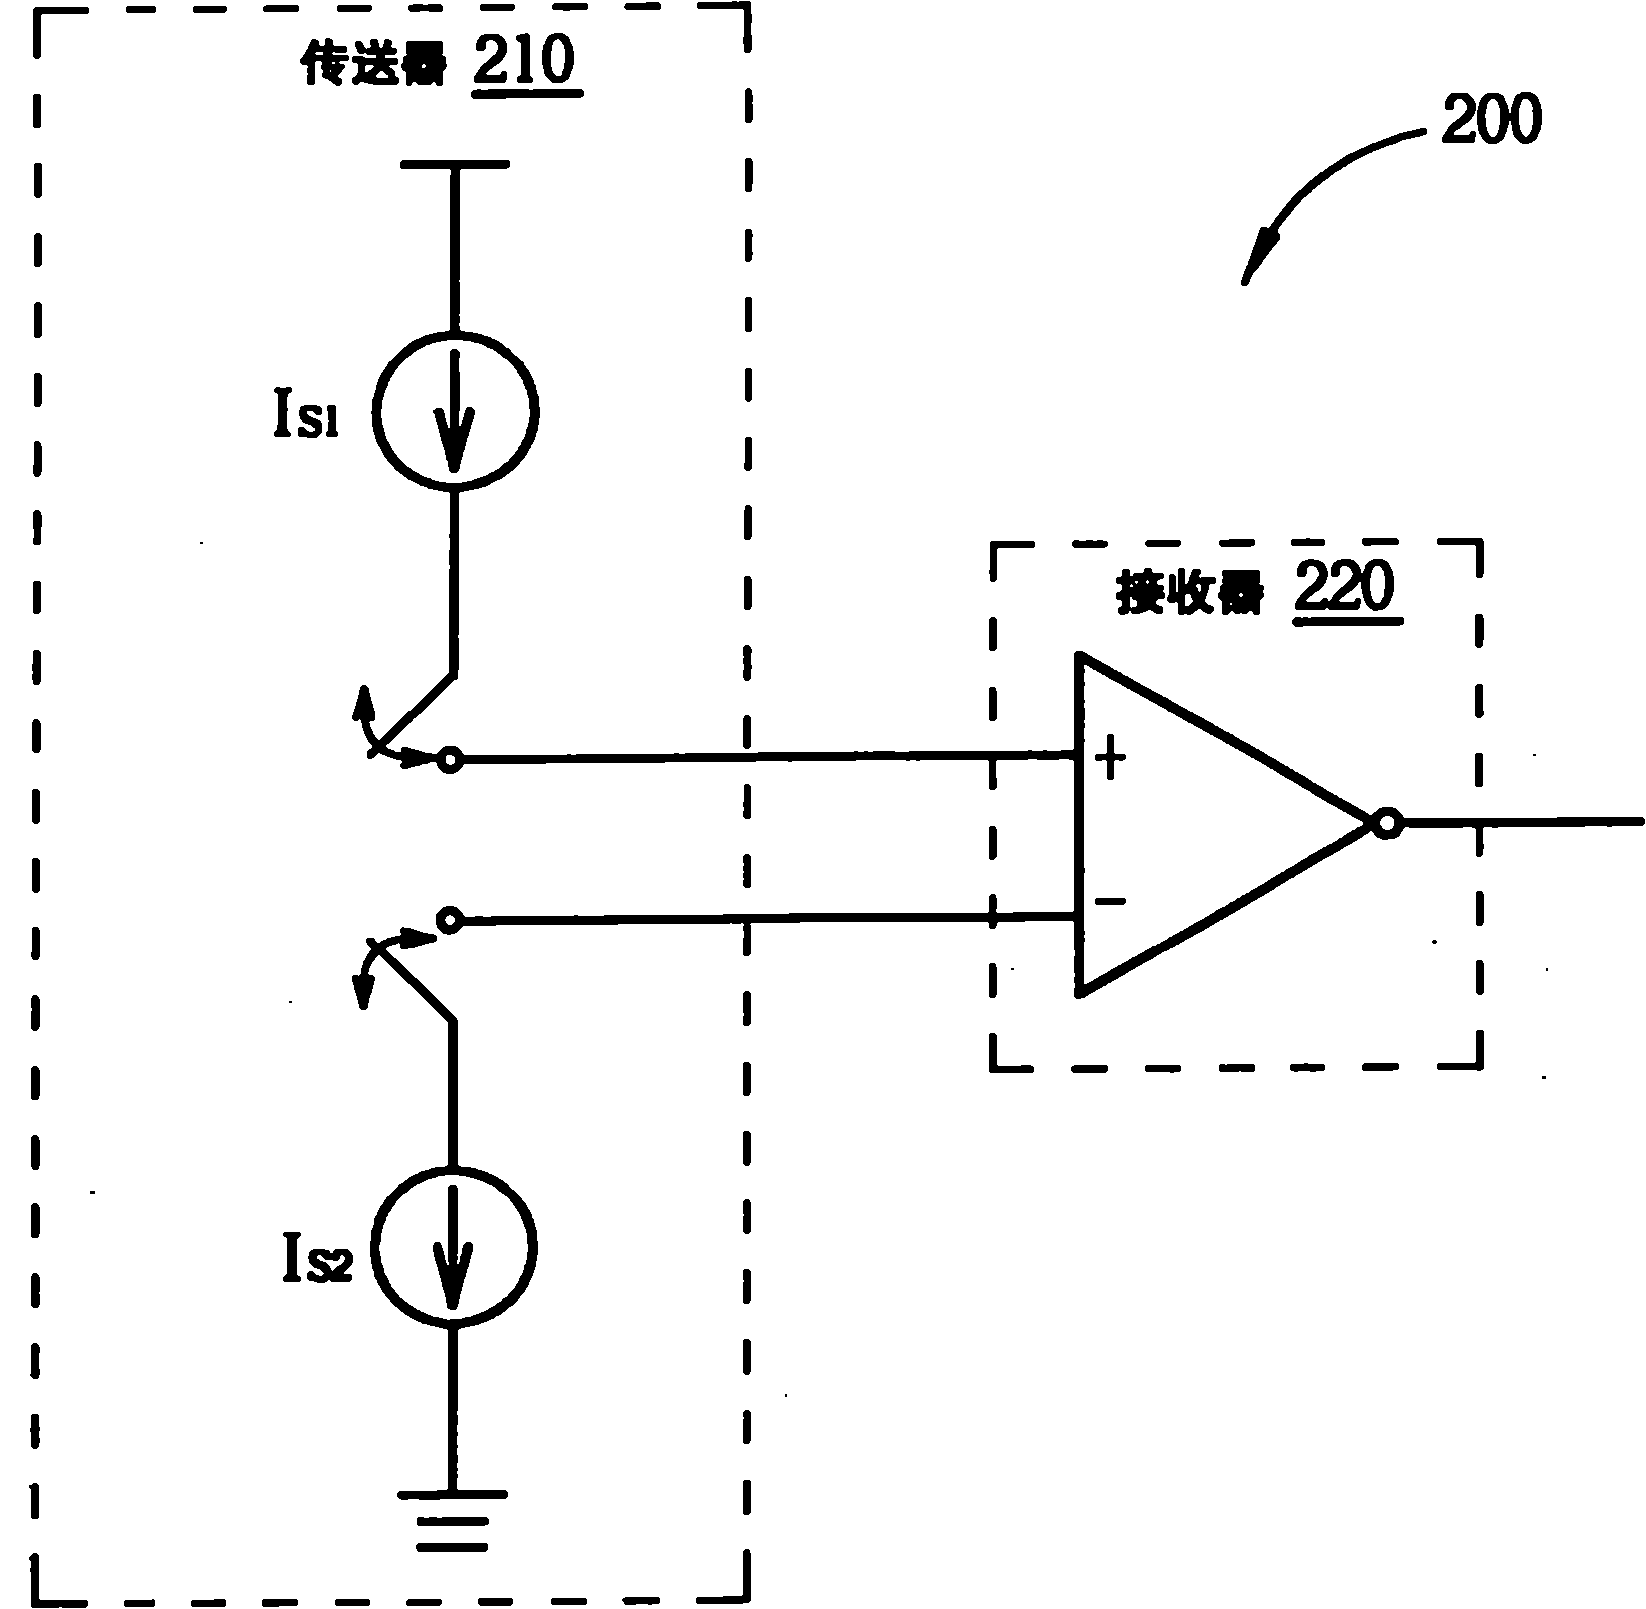 Source driver and display employing source driver